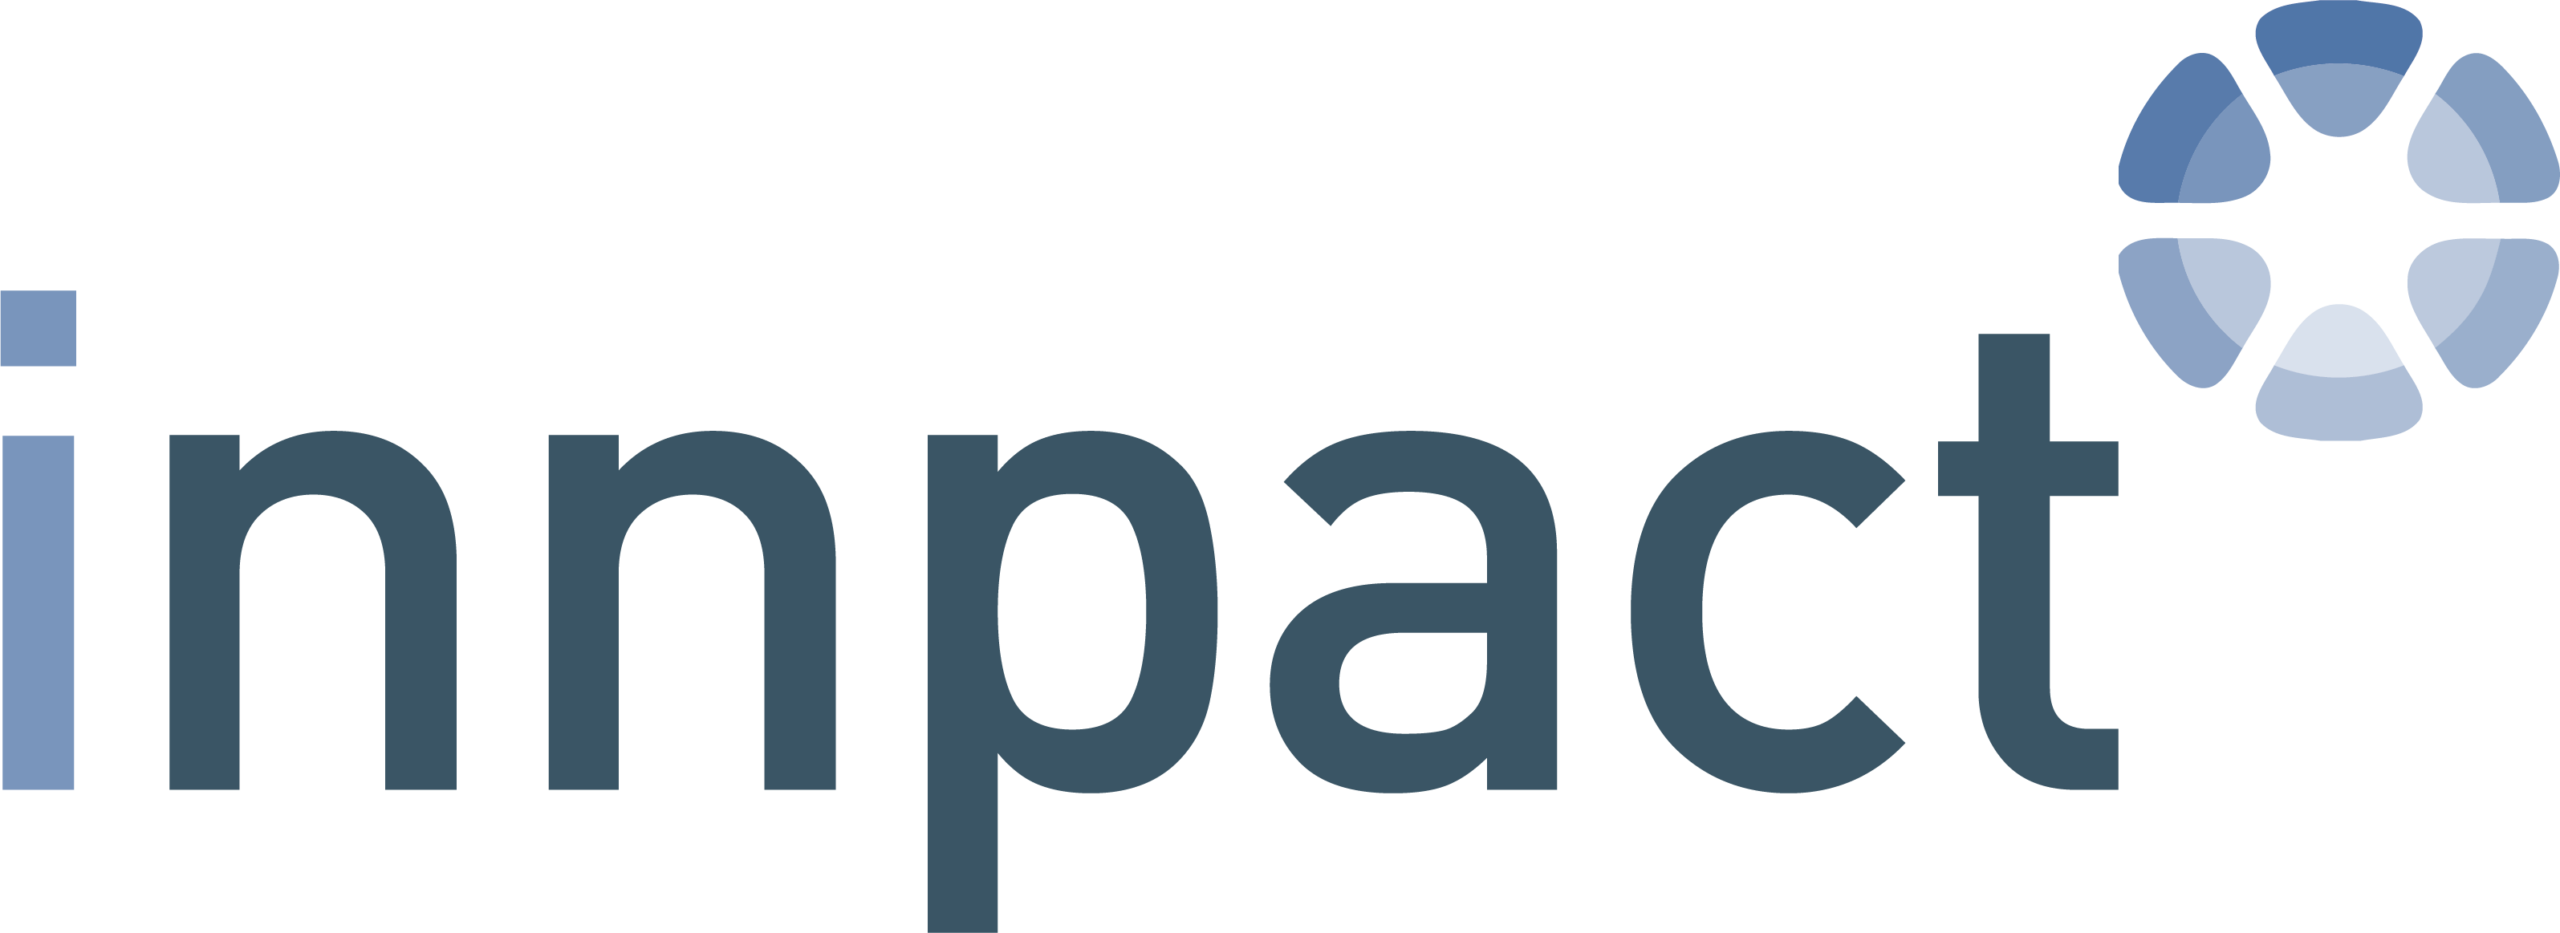 innpact logo without baseline 01 png